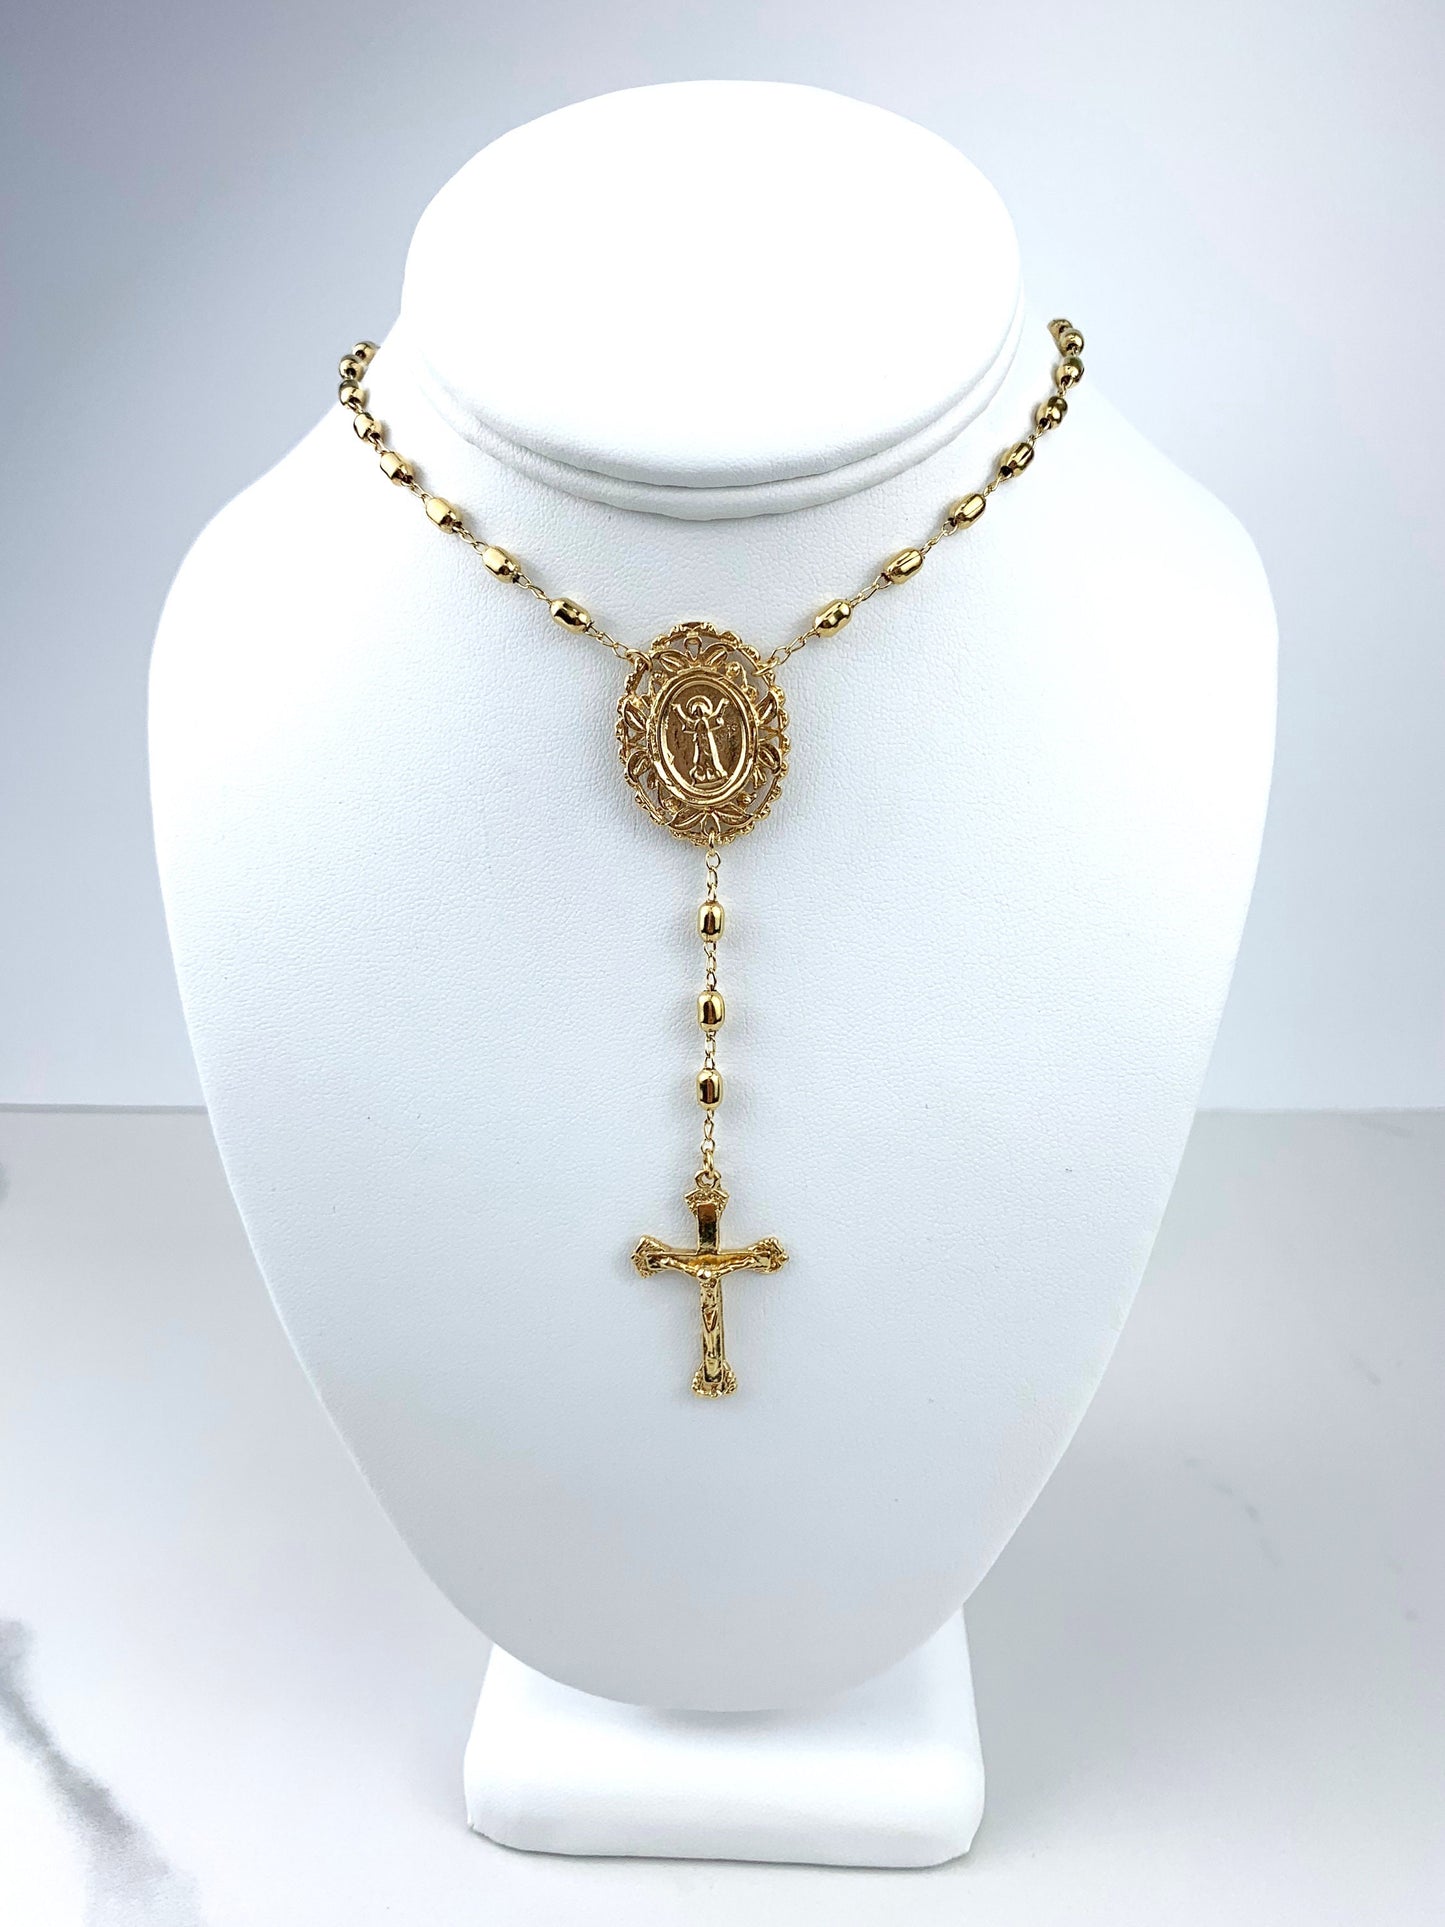 18k Gold Filled Beaded Chain Divine Child, Divino Nino Rosary Necklace, Religious Jewelry, Wholesale Jewelry Making Supplies